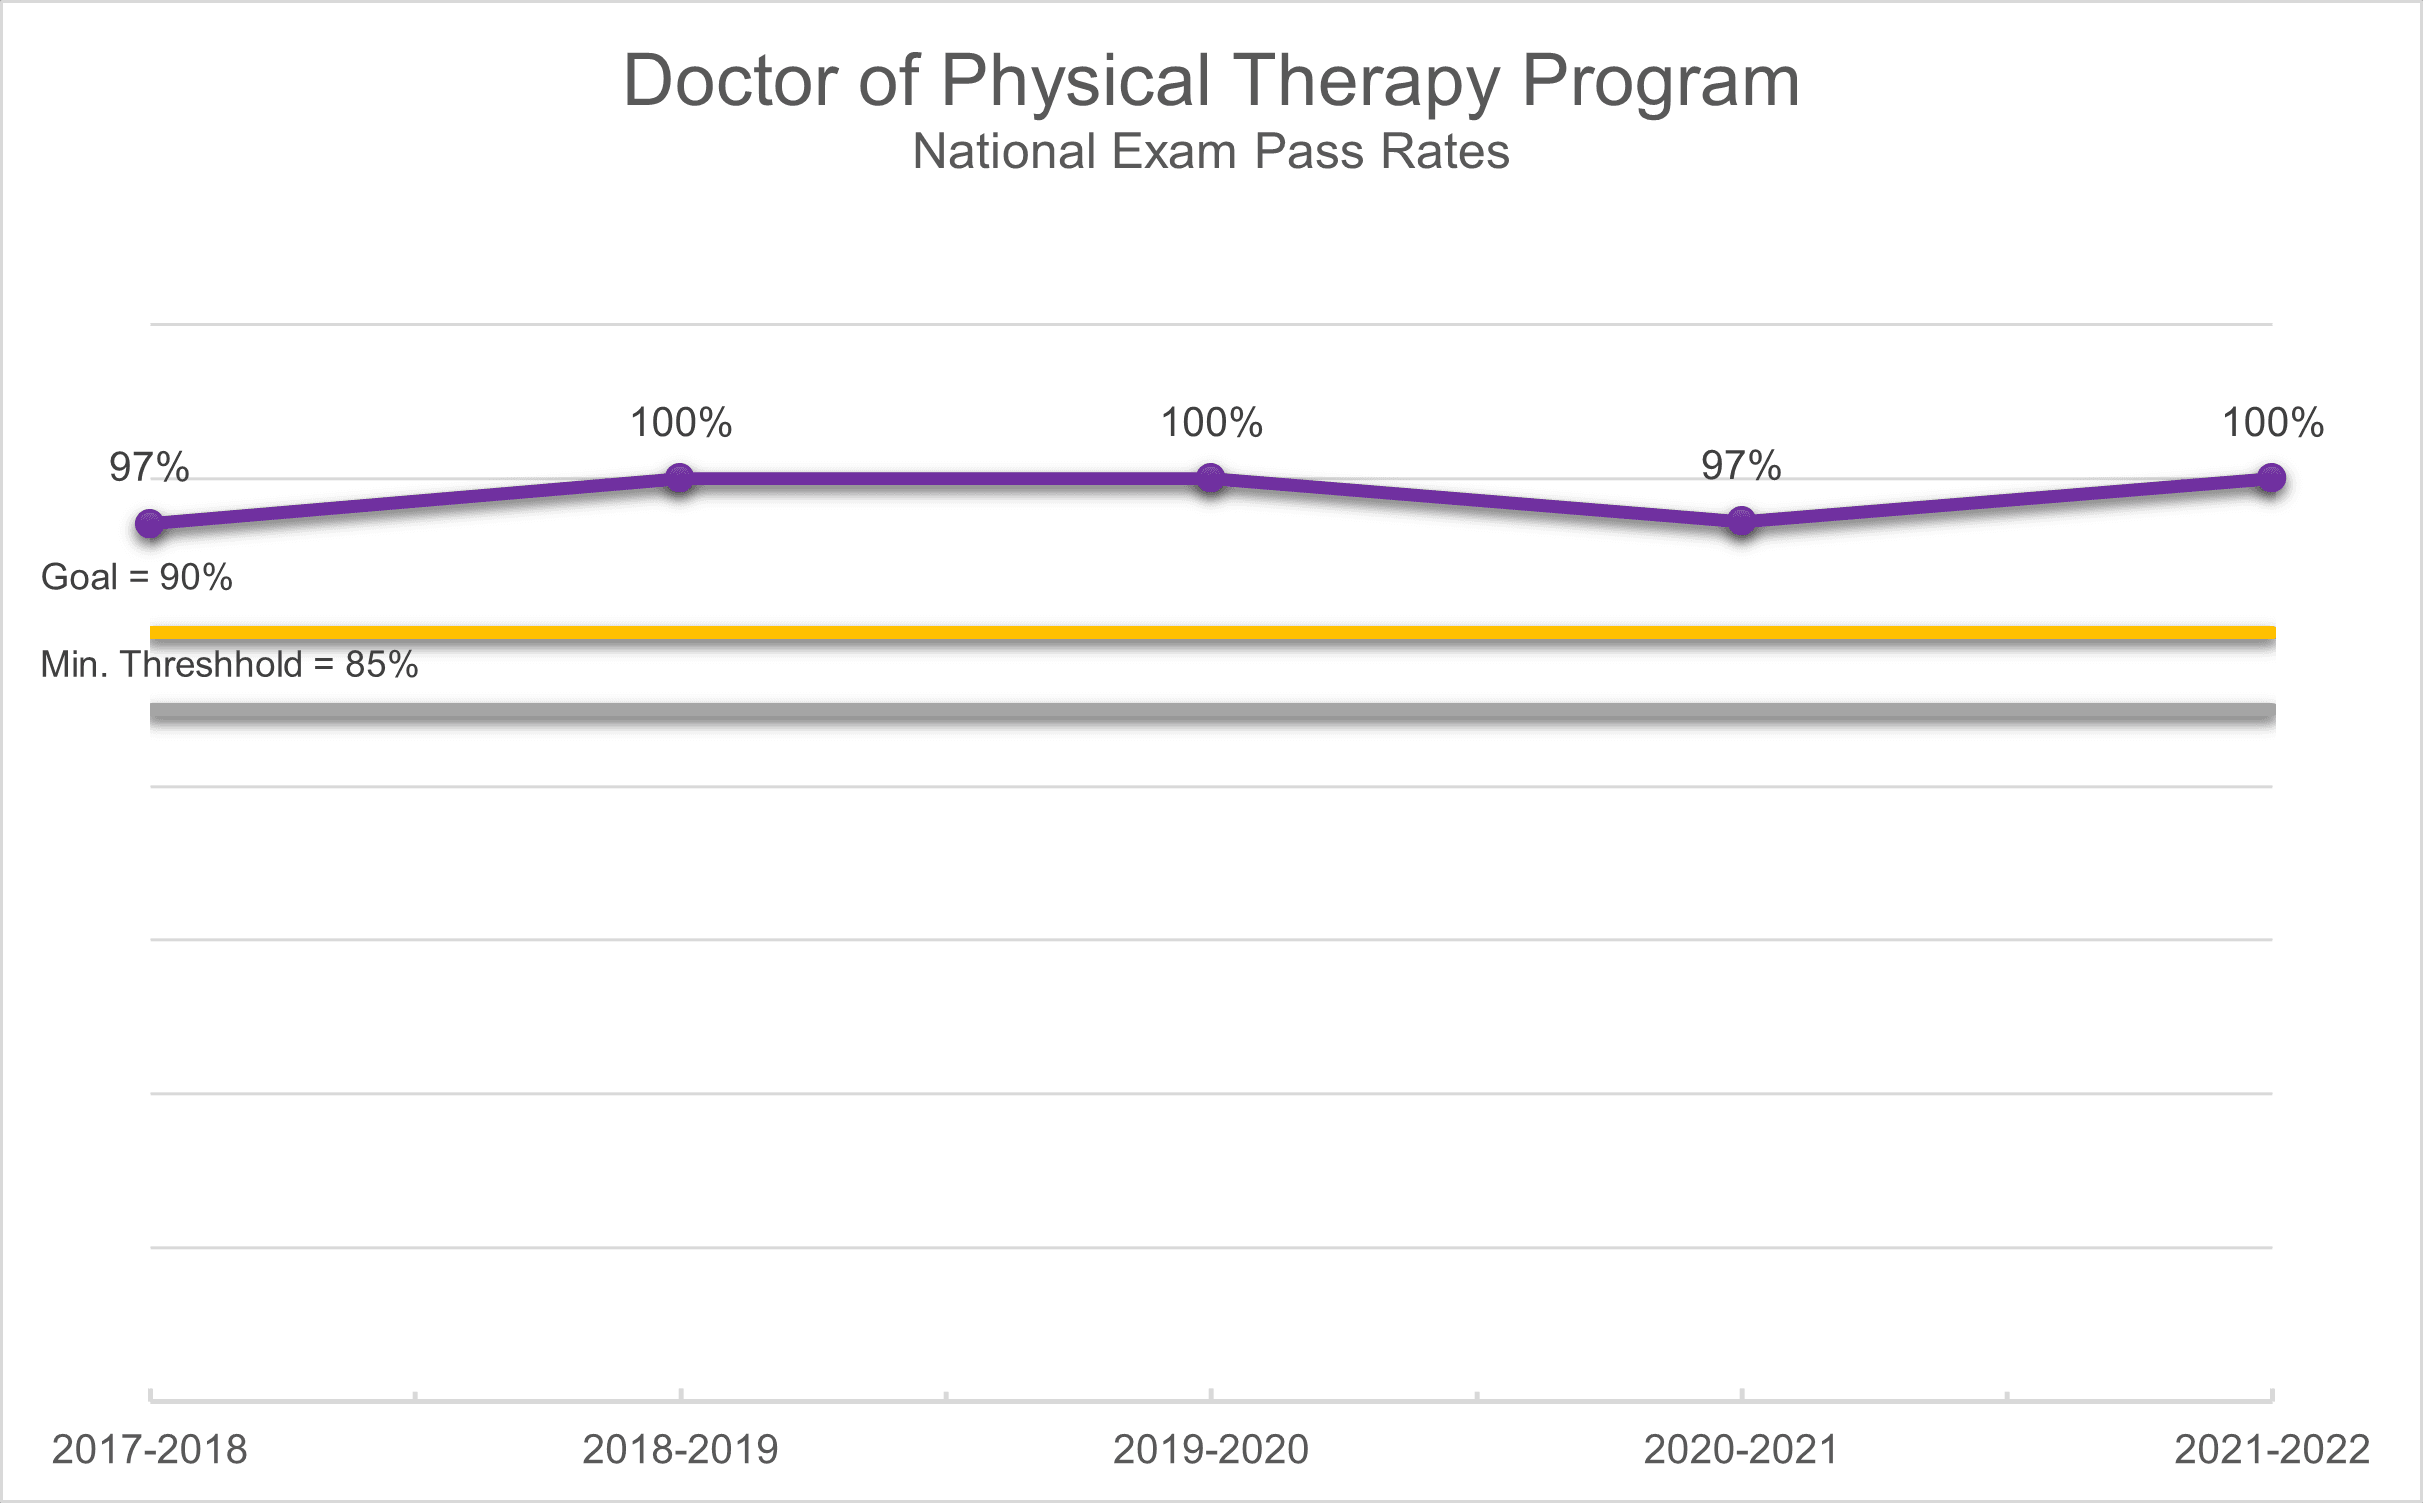 Doctor of Physical Therapy National Exam Pass Rates